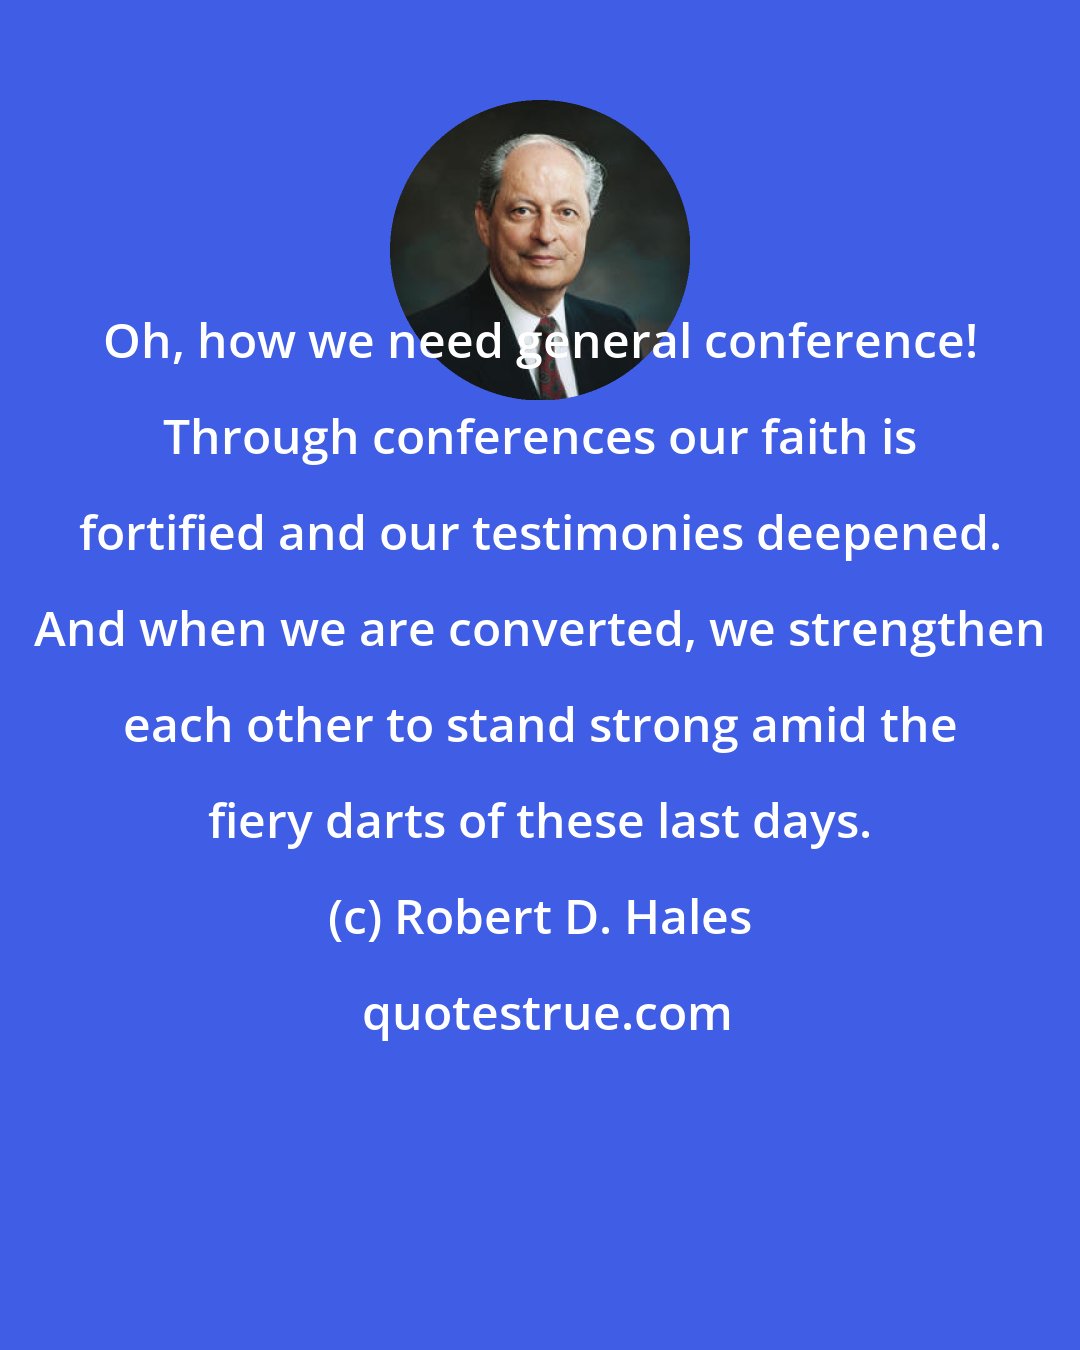 Robert D. Hales: Oh, how we need general conference! Through conferences our faith is fortified and our testimonies deepened. And when we are converted, we strengthen each other to stand strong amid the fiery darts of these last days.